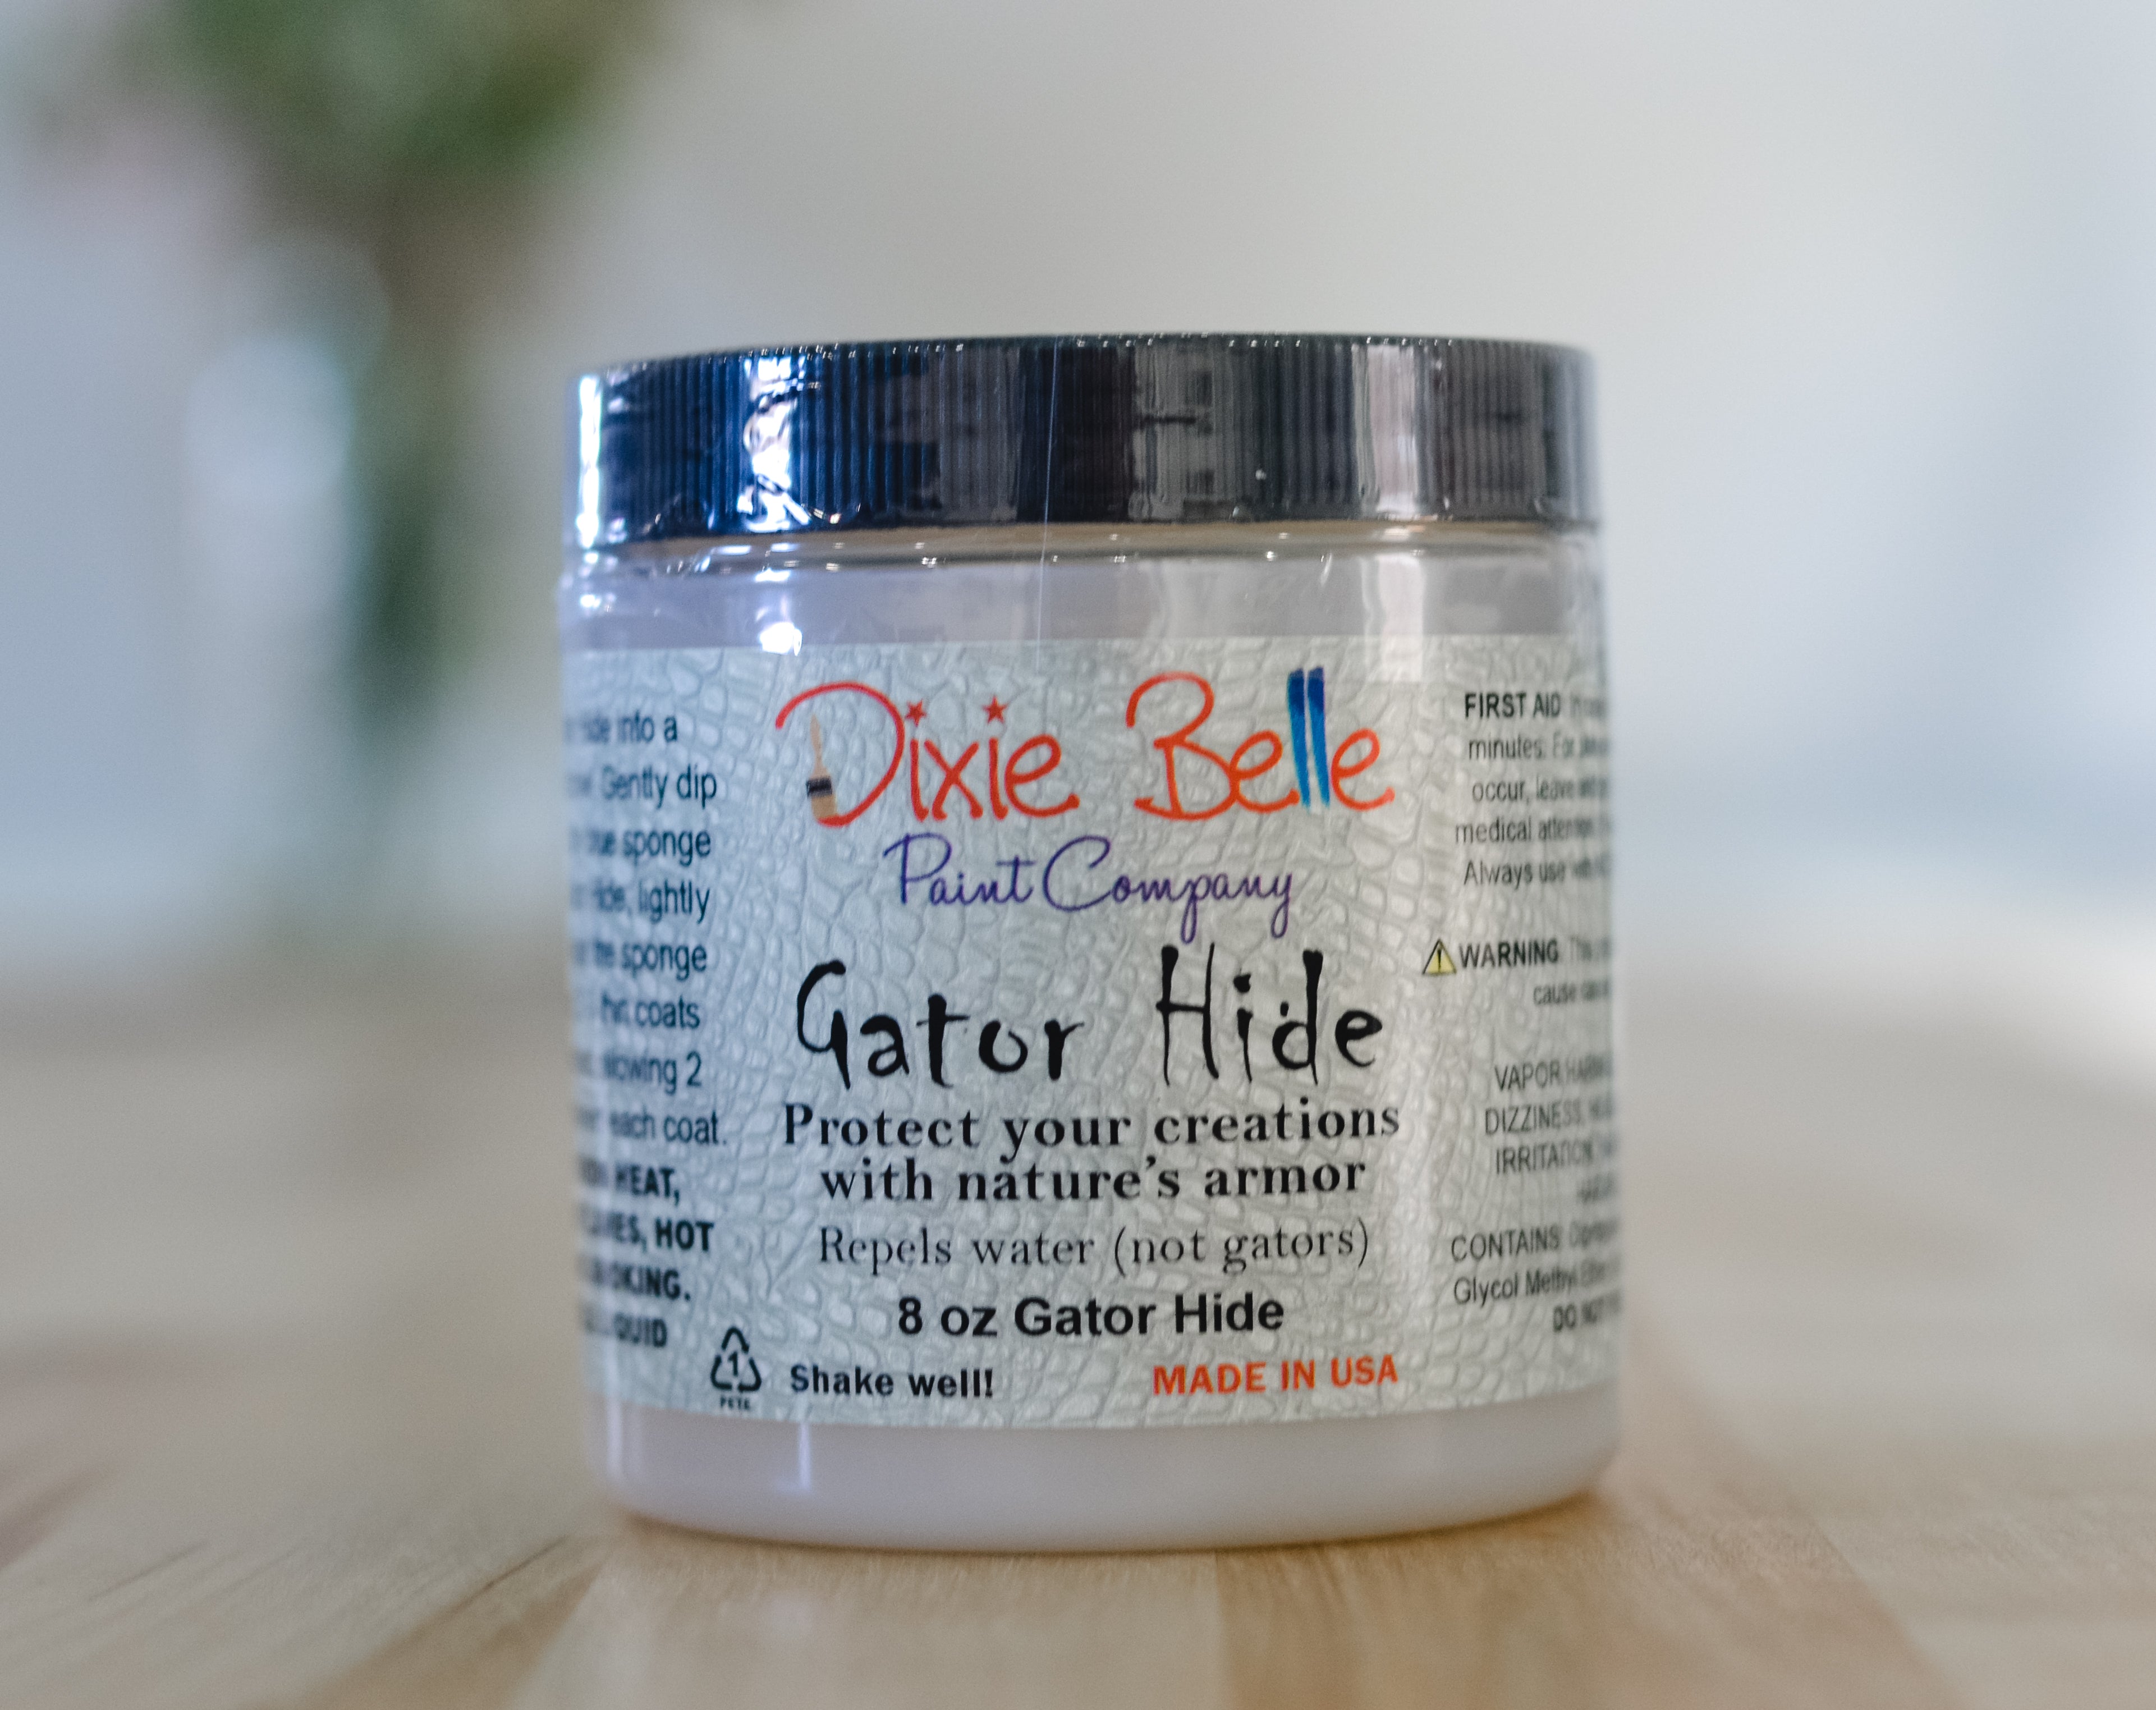 How to Use Dixie Belle Gator Hide 